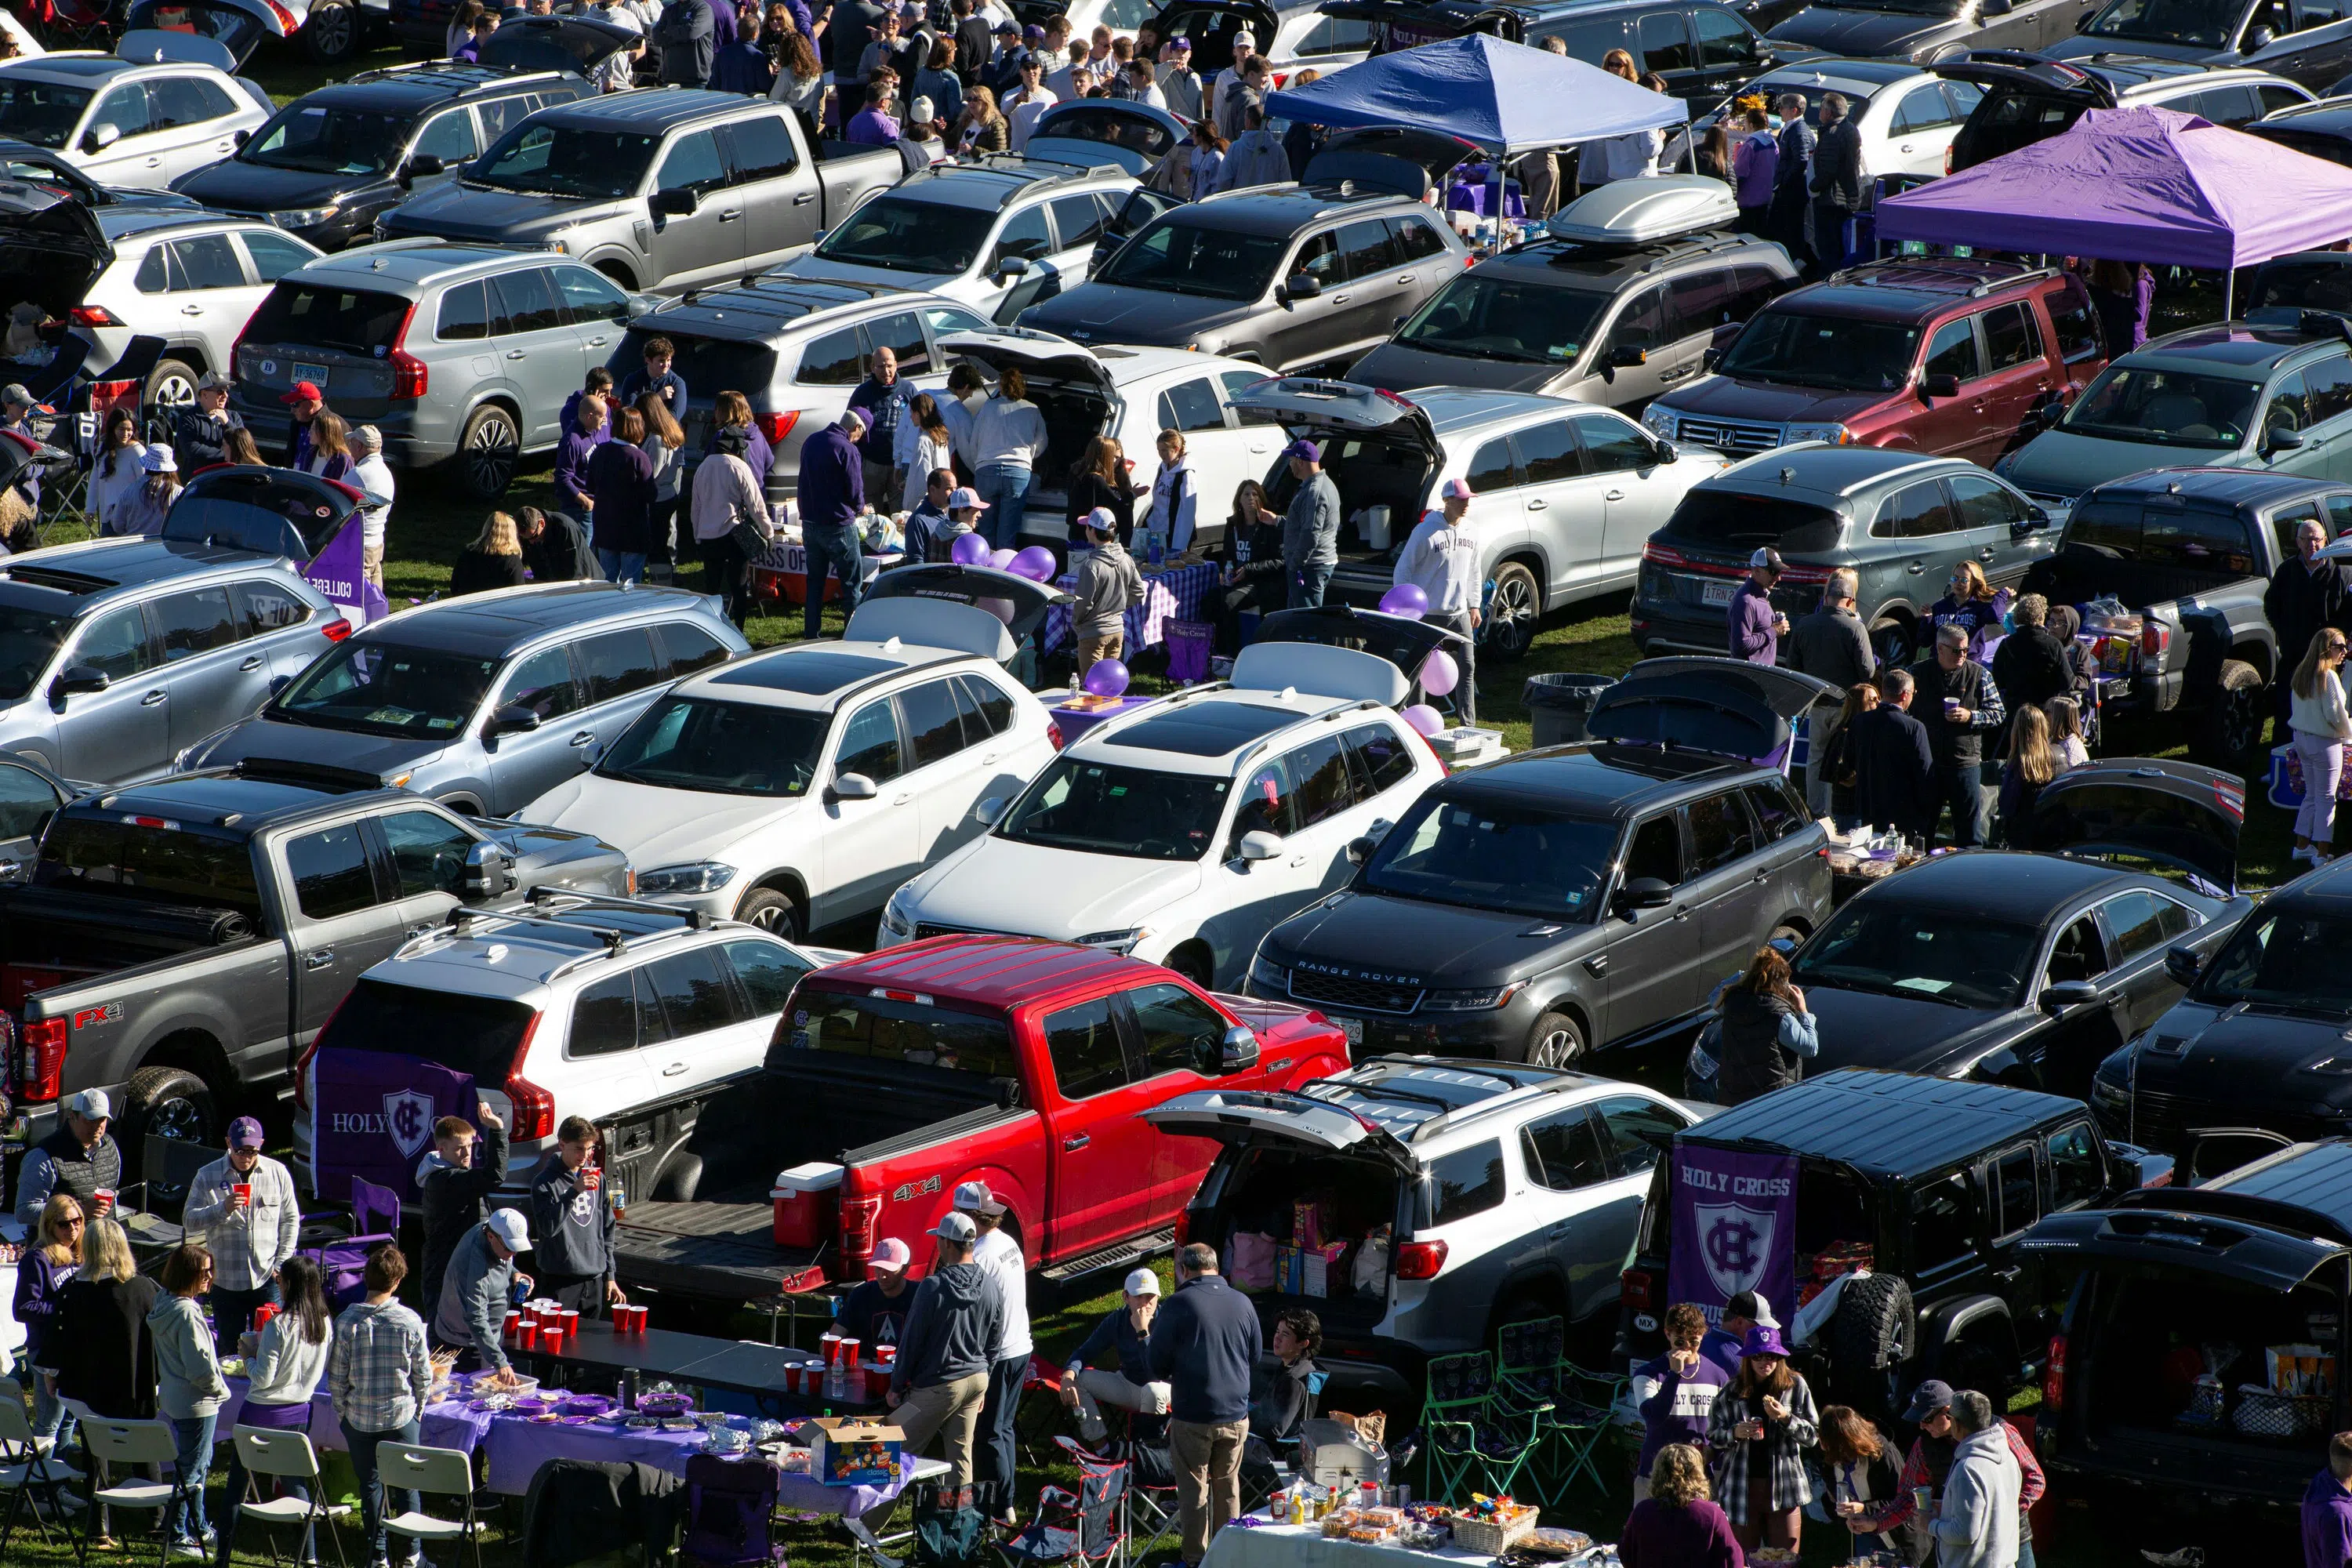 Rows of cars tailgating on the baseball field 